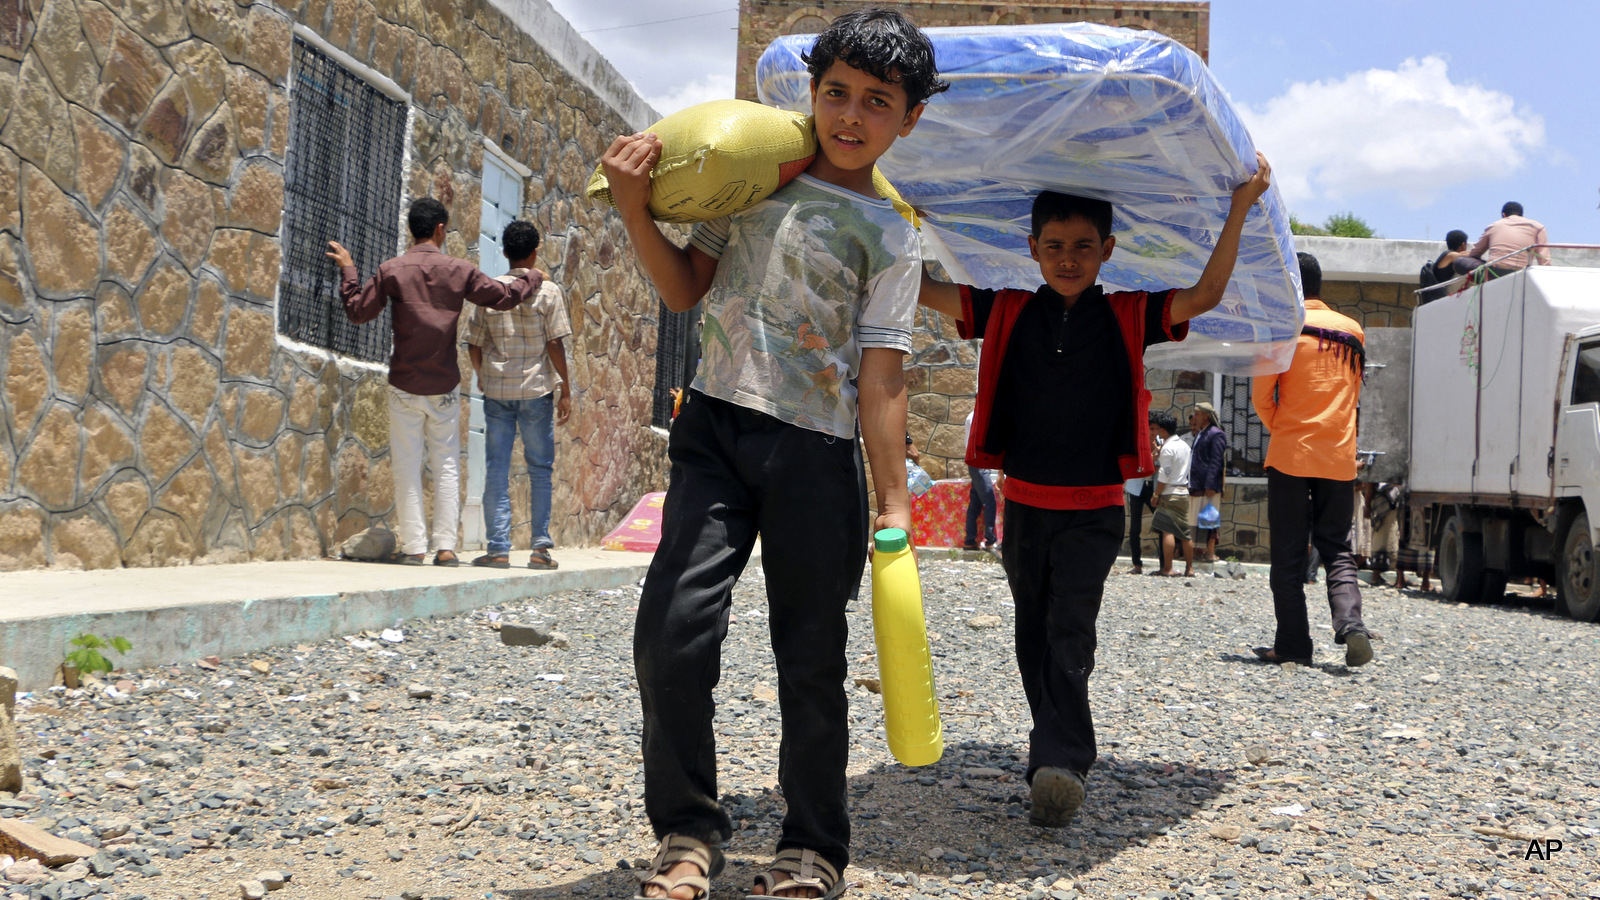 Boys carry relief supplies to their families who fled fighting in the southern city of Aden, during a food distribution effort by Yemeni volunteers, in Taiz, Yemen.